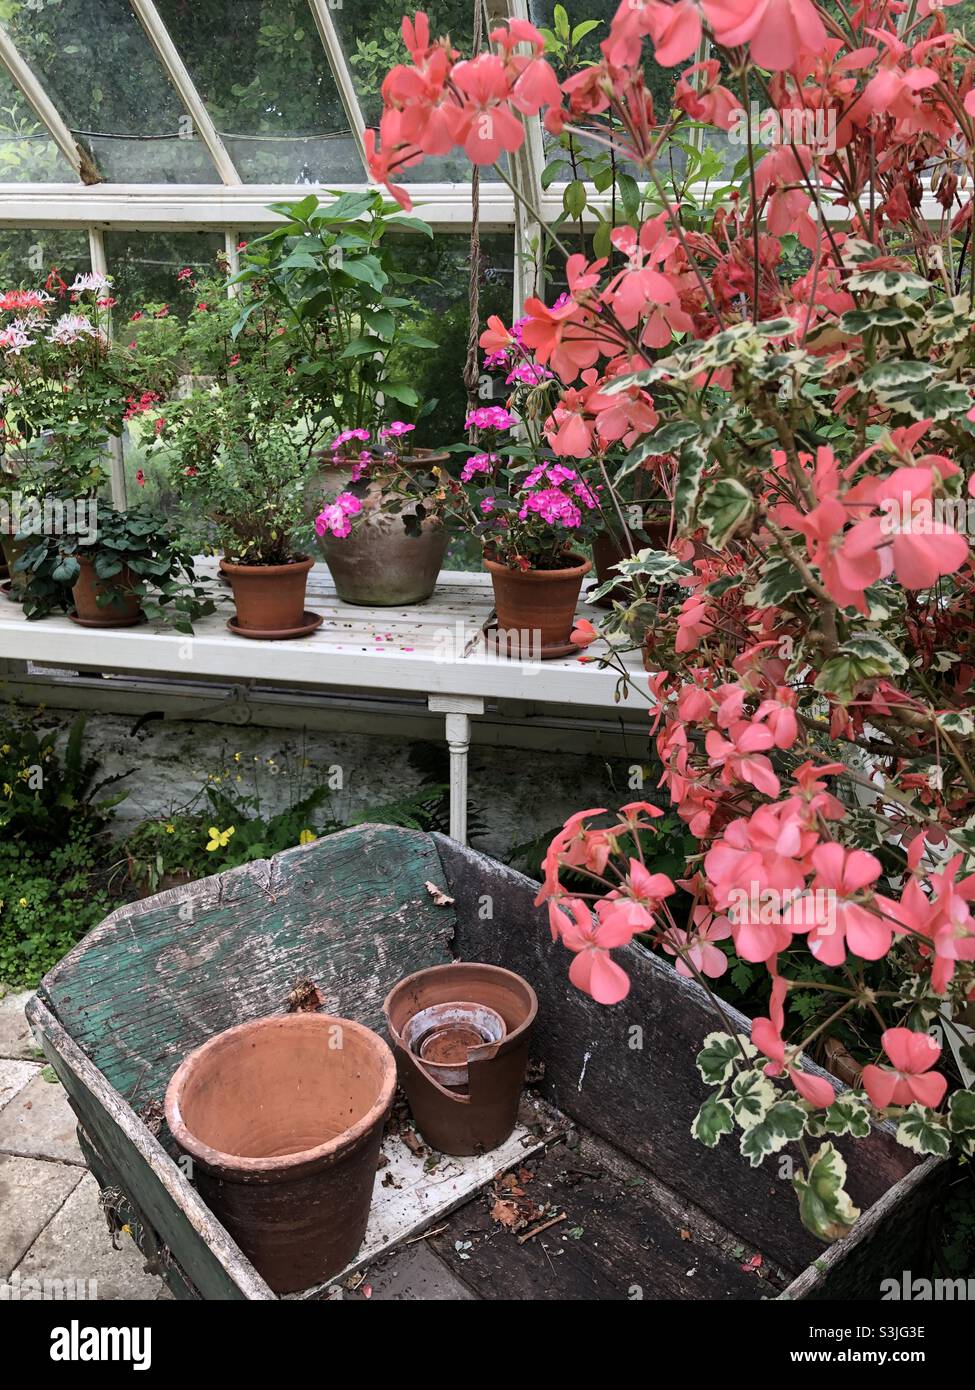 Wheelbarrow in glasshouse with broken terracotta plant pots and pink pelargoniums Stock Photo